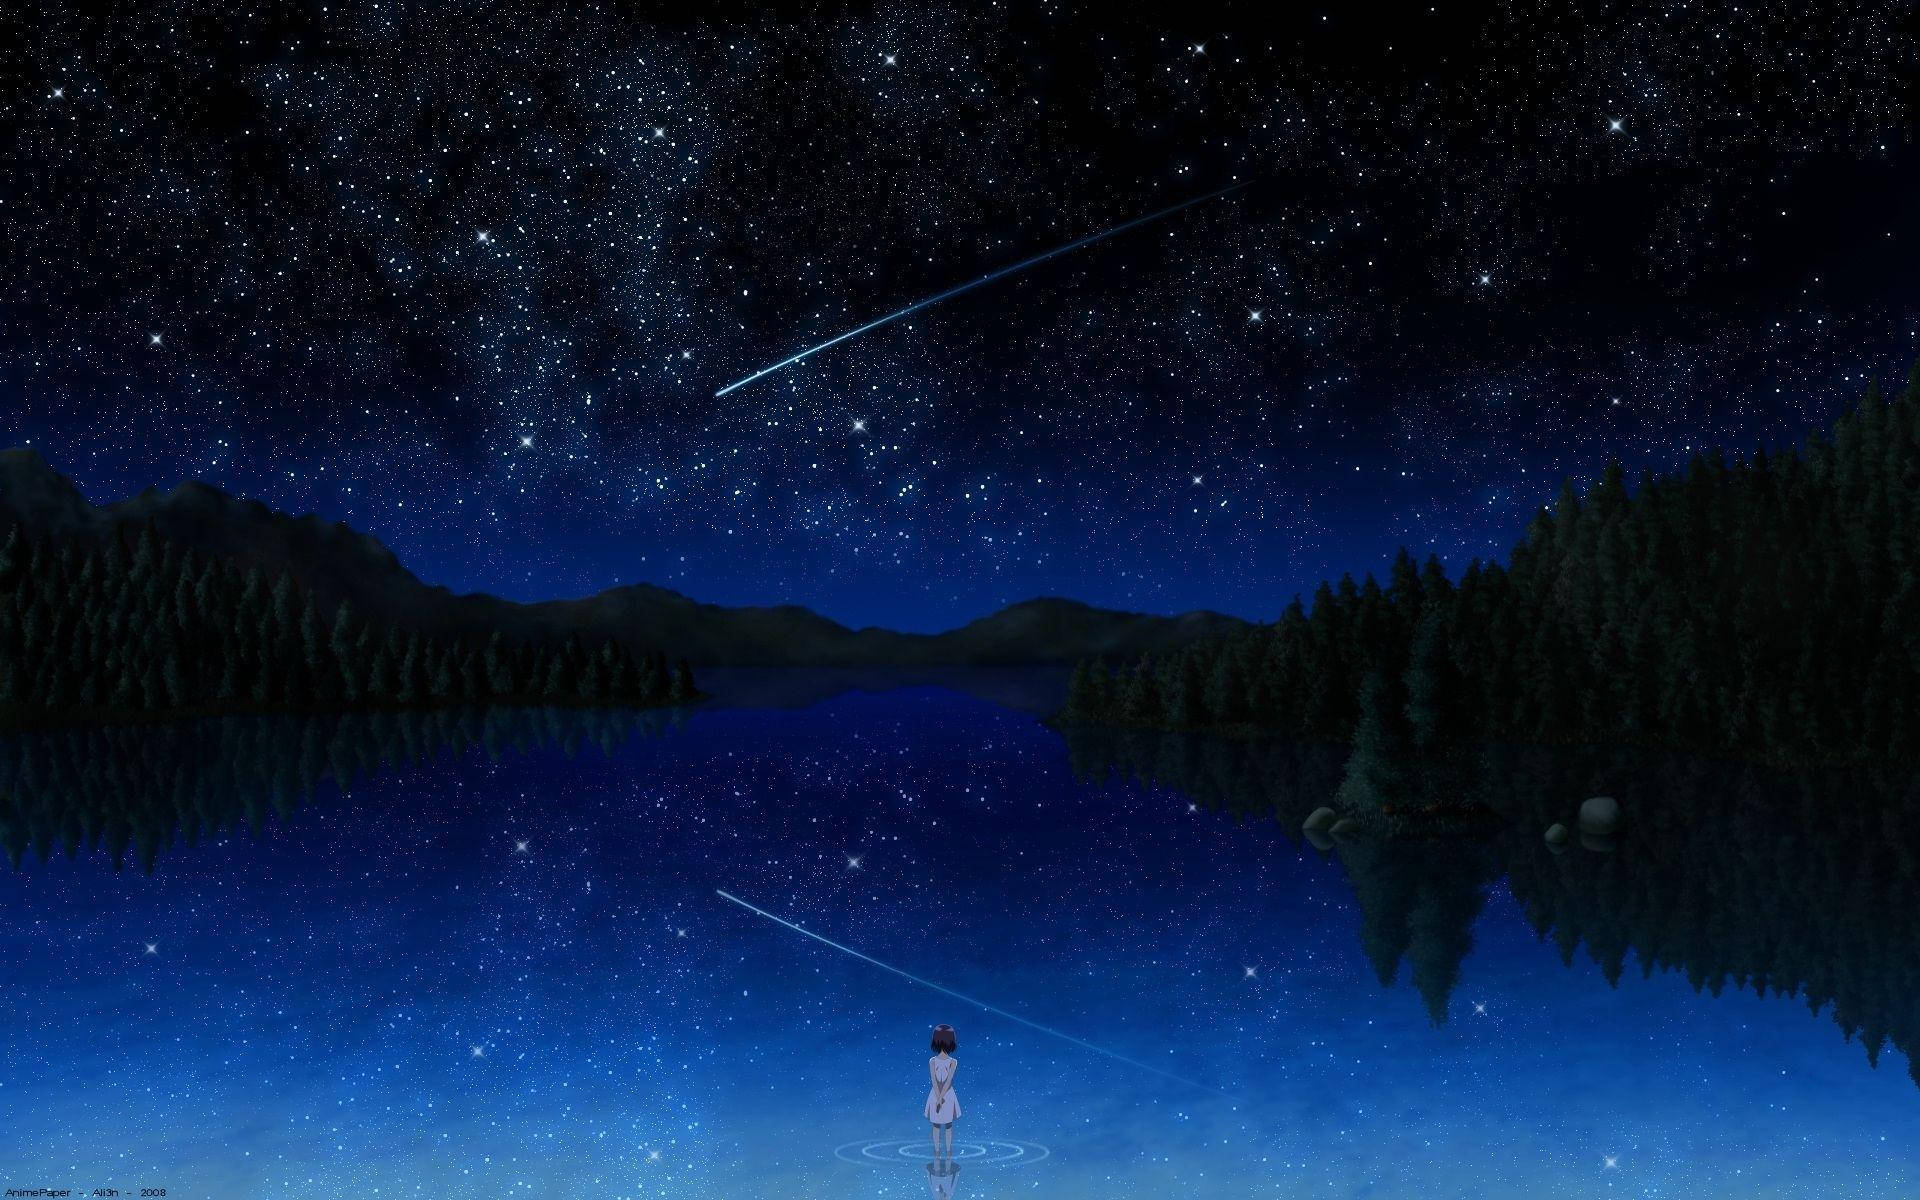 A Peaceful Scene from an Anime Wallpaper